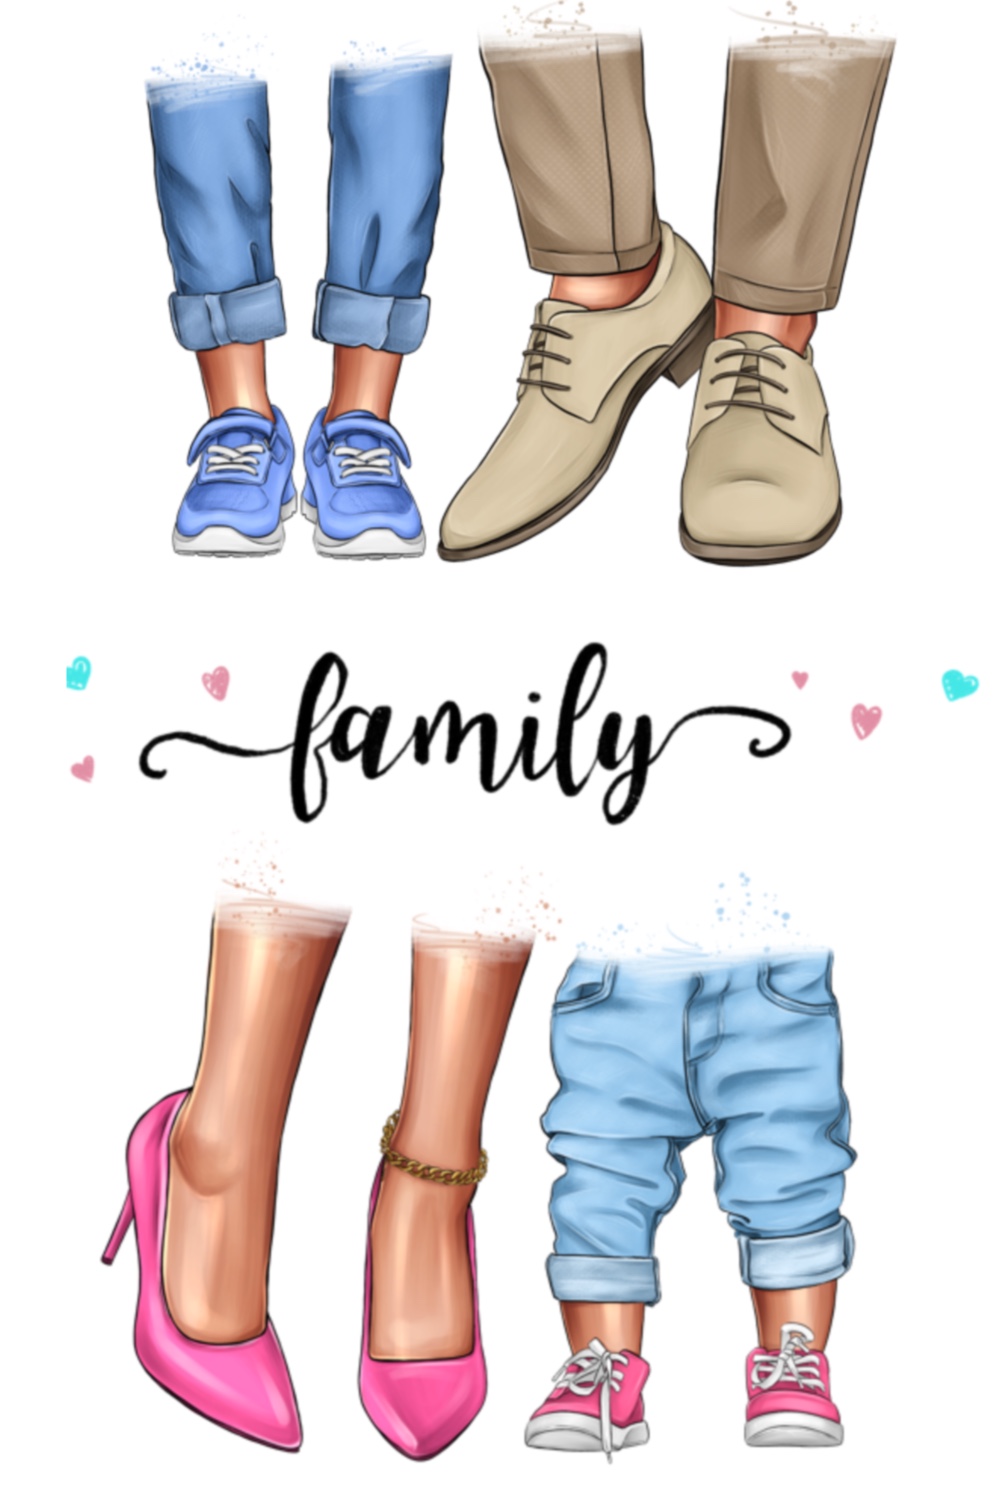 Family Clipart Mom Dad Daughter Son Pinterest Image.